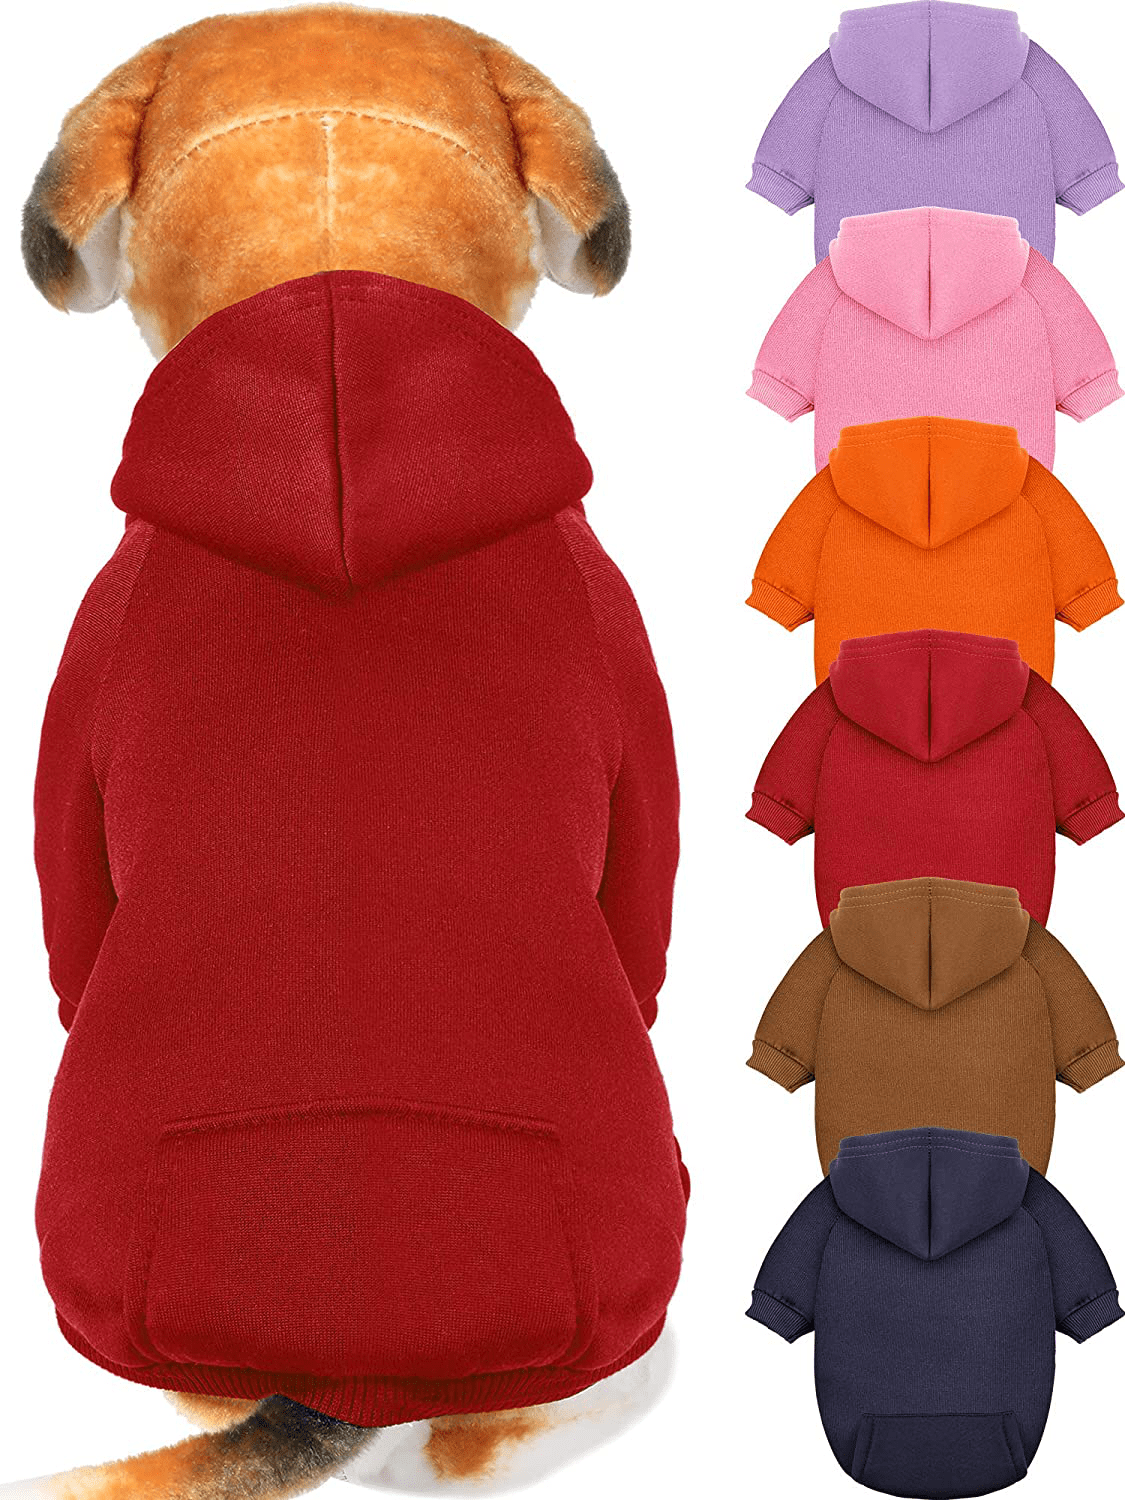 6 Pieces Dog Hoodie Dog Clothes Sweaters with Hat, Pet Winter Clothes Warm Hoodies Coat Sweater for Small Dogs Chihuahua